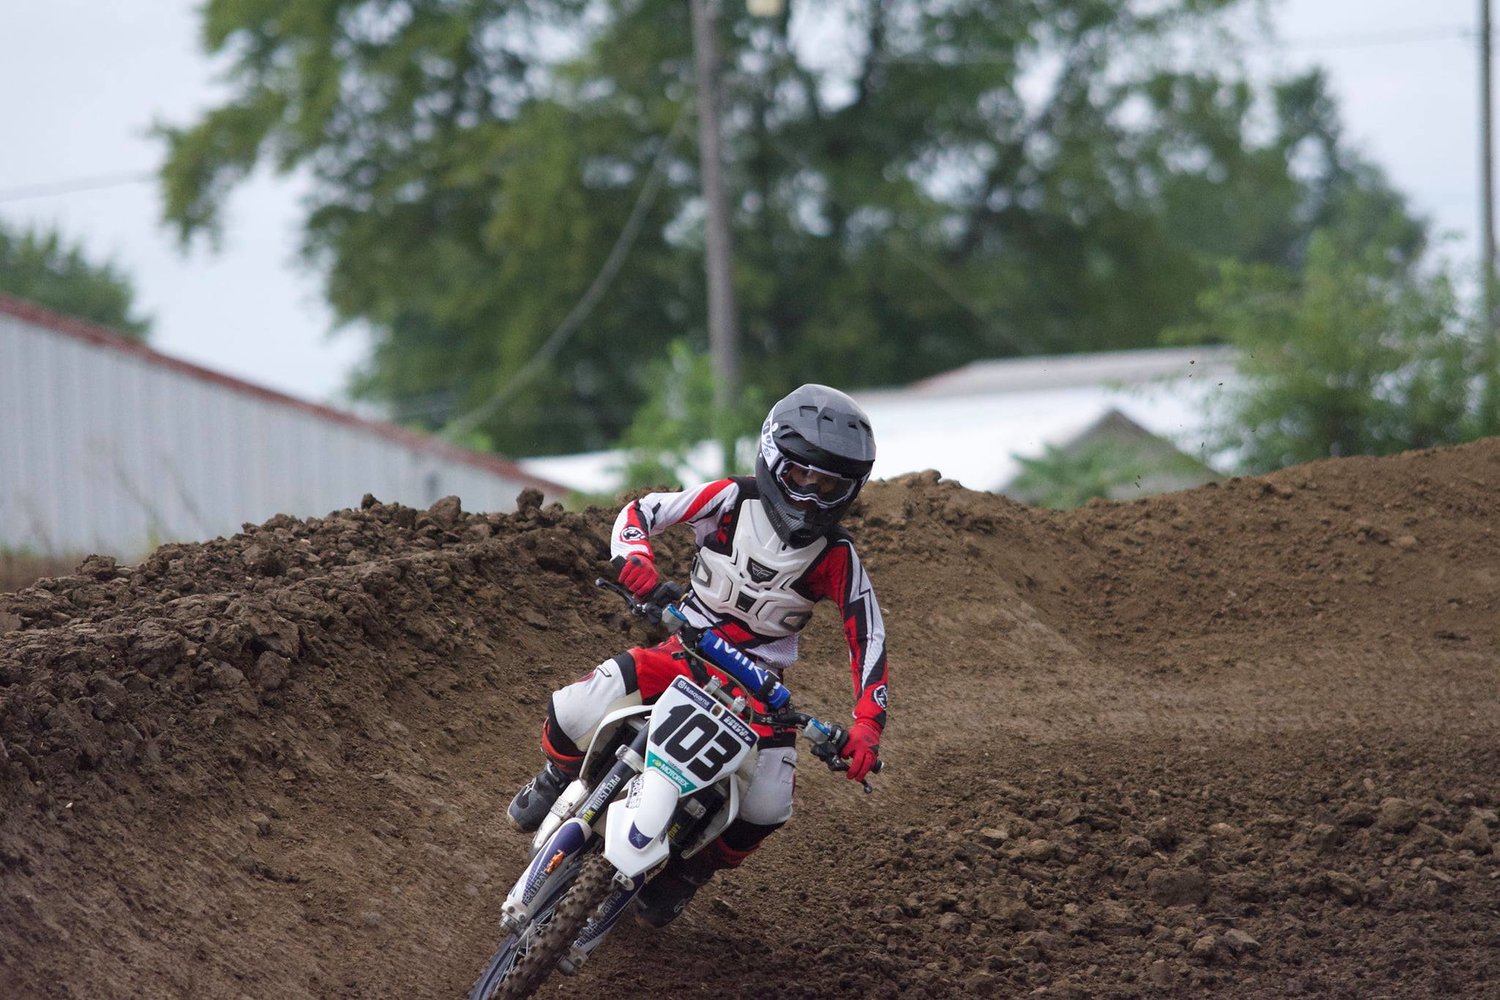 Donnellson's Cooper Duff, pictured here at Megacross in Mendota, picked up a pair of wins in the Fox Valley Off Road Series finale on Sept. 25-26, in Wedron. Duff took first in the 65cc Grand Prix, with his dad, Ryan, and brother, Zach, taking first and second respectively in their divisions on Sept. 25, then took first again in the 65cc Hare Scramble the next day.